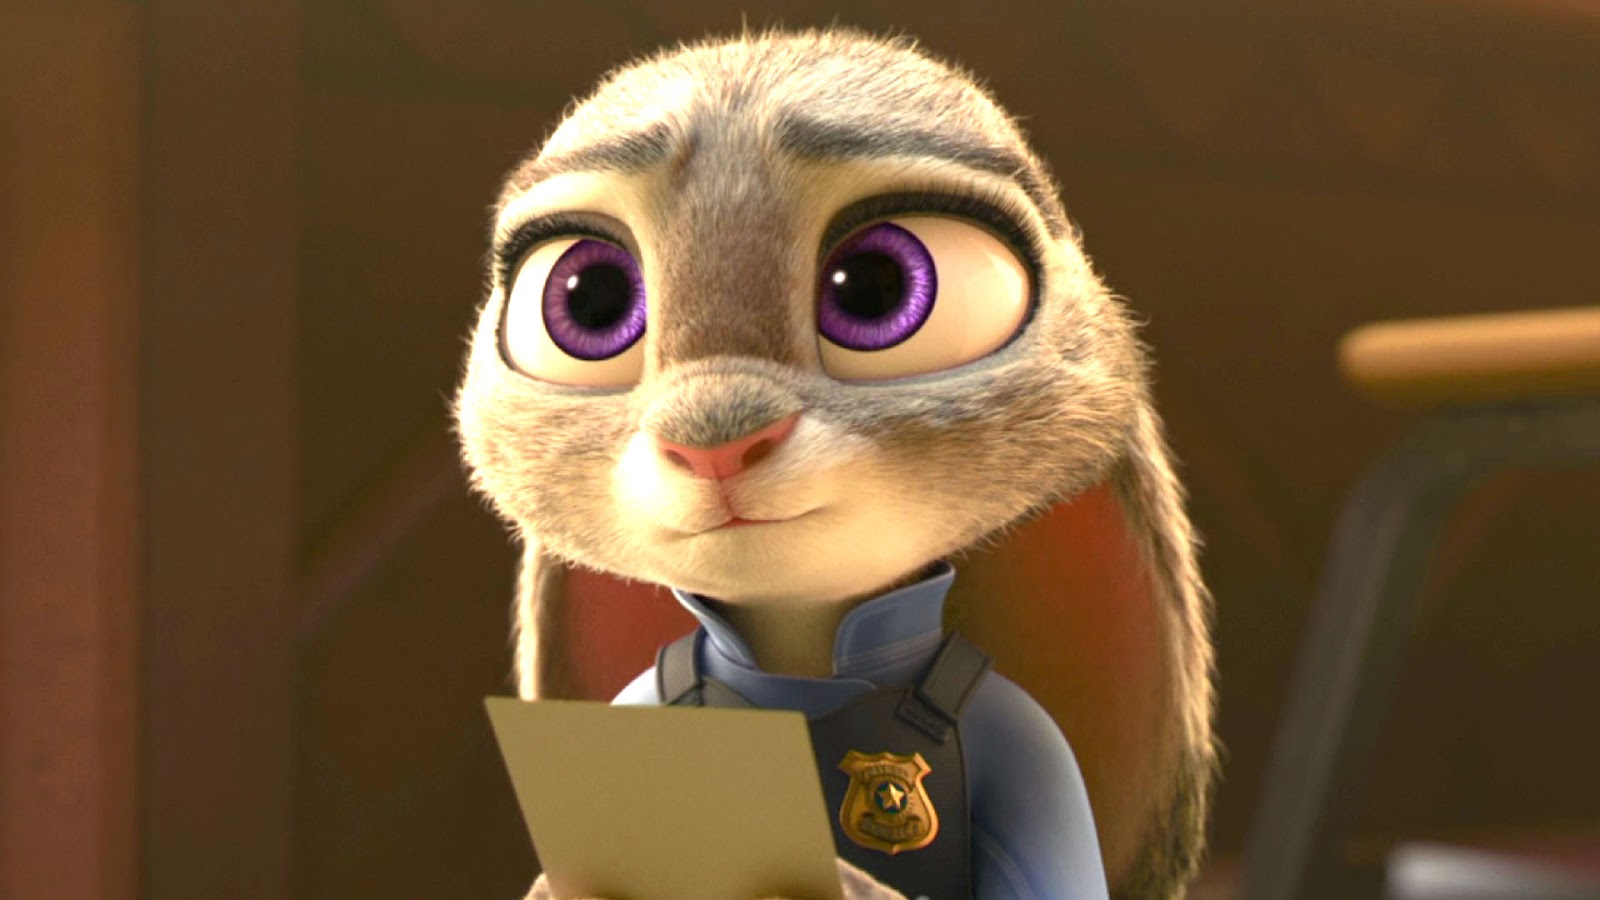 Zootopia Wallpapers 2016 - Boss Wallpapers 5k, 4k and 8k Ultra HD, UHD Download Free1600 x 900